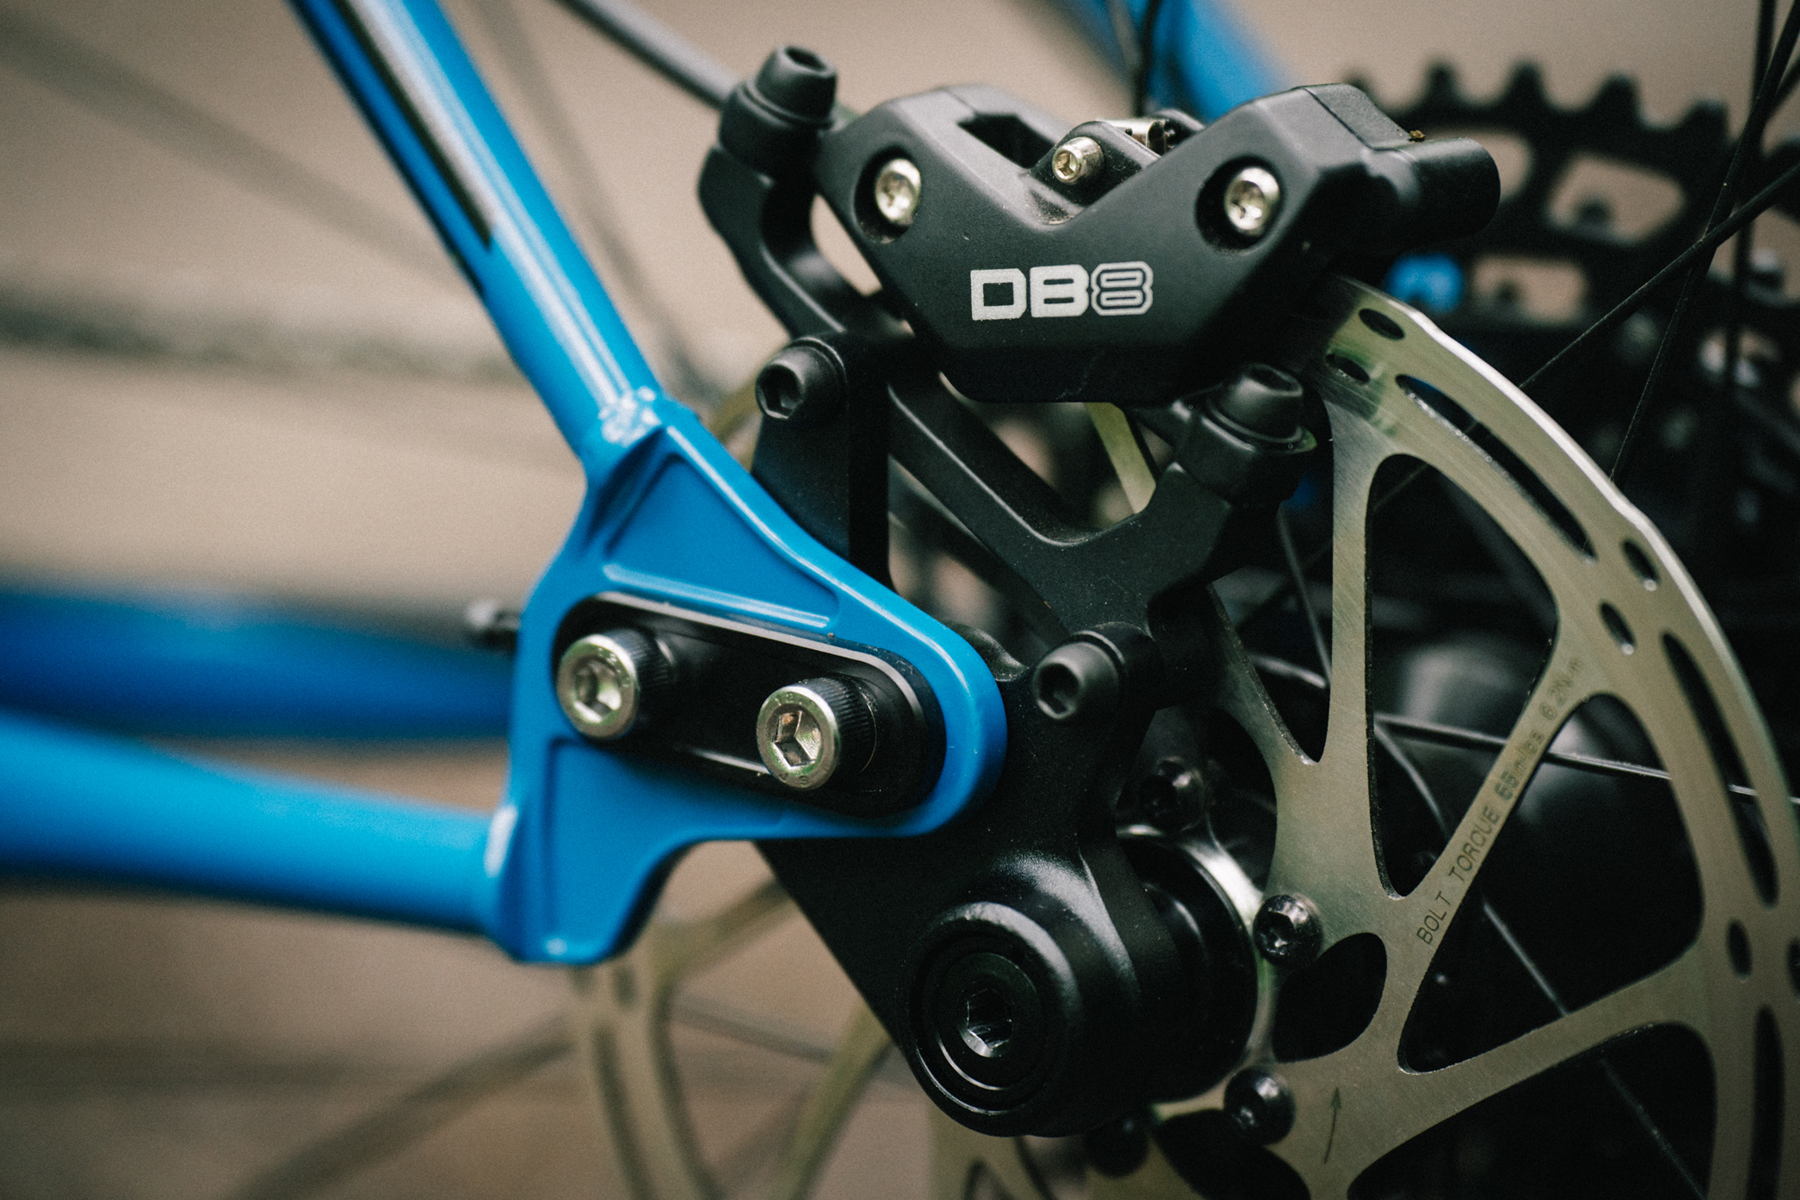 David Golay reviews the Transition TransAM for Blister